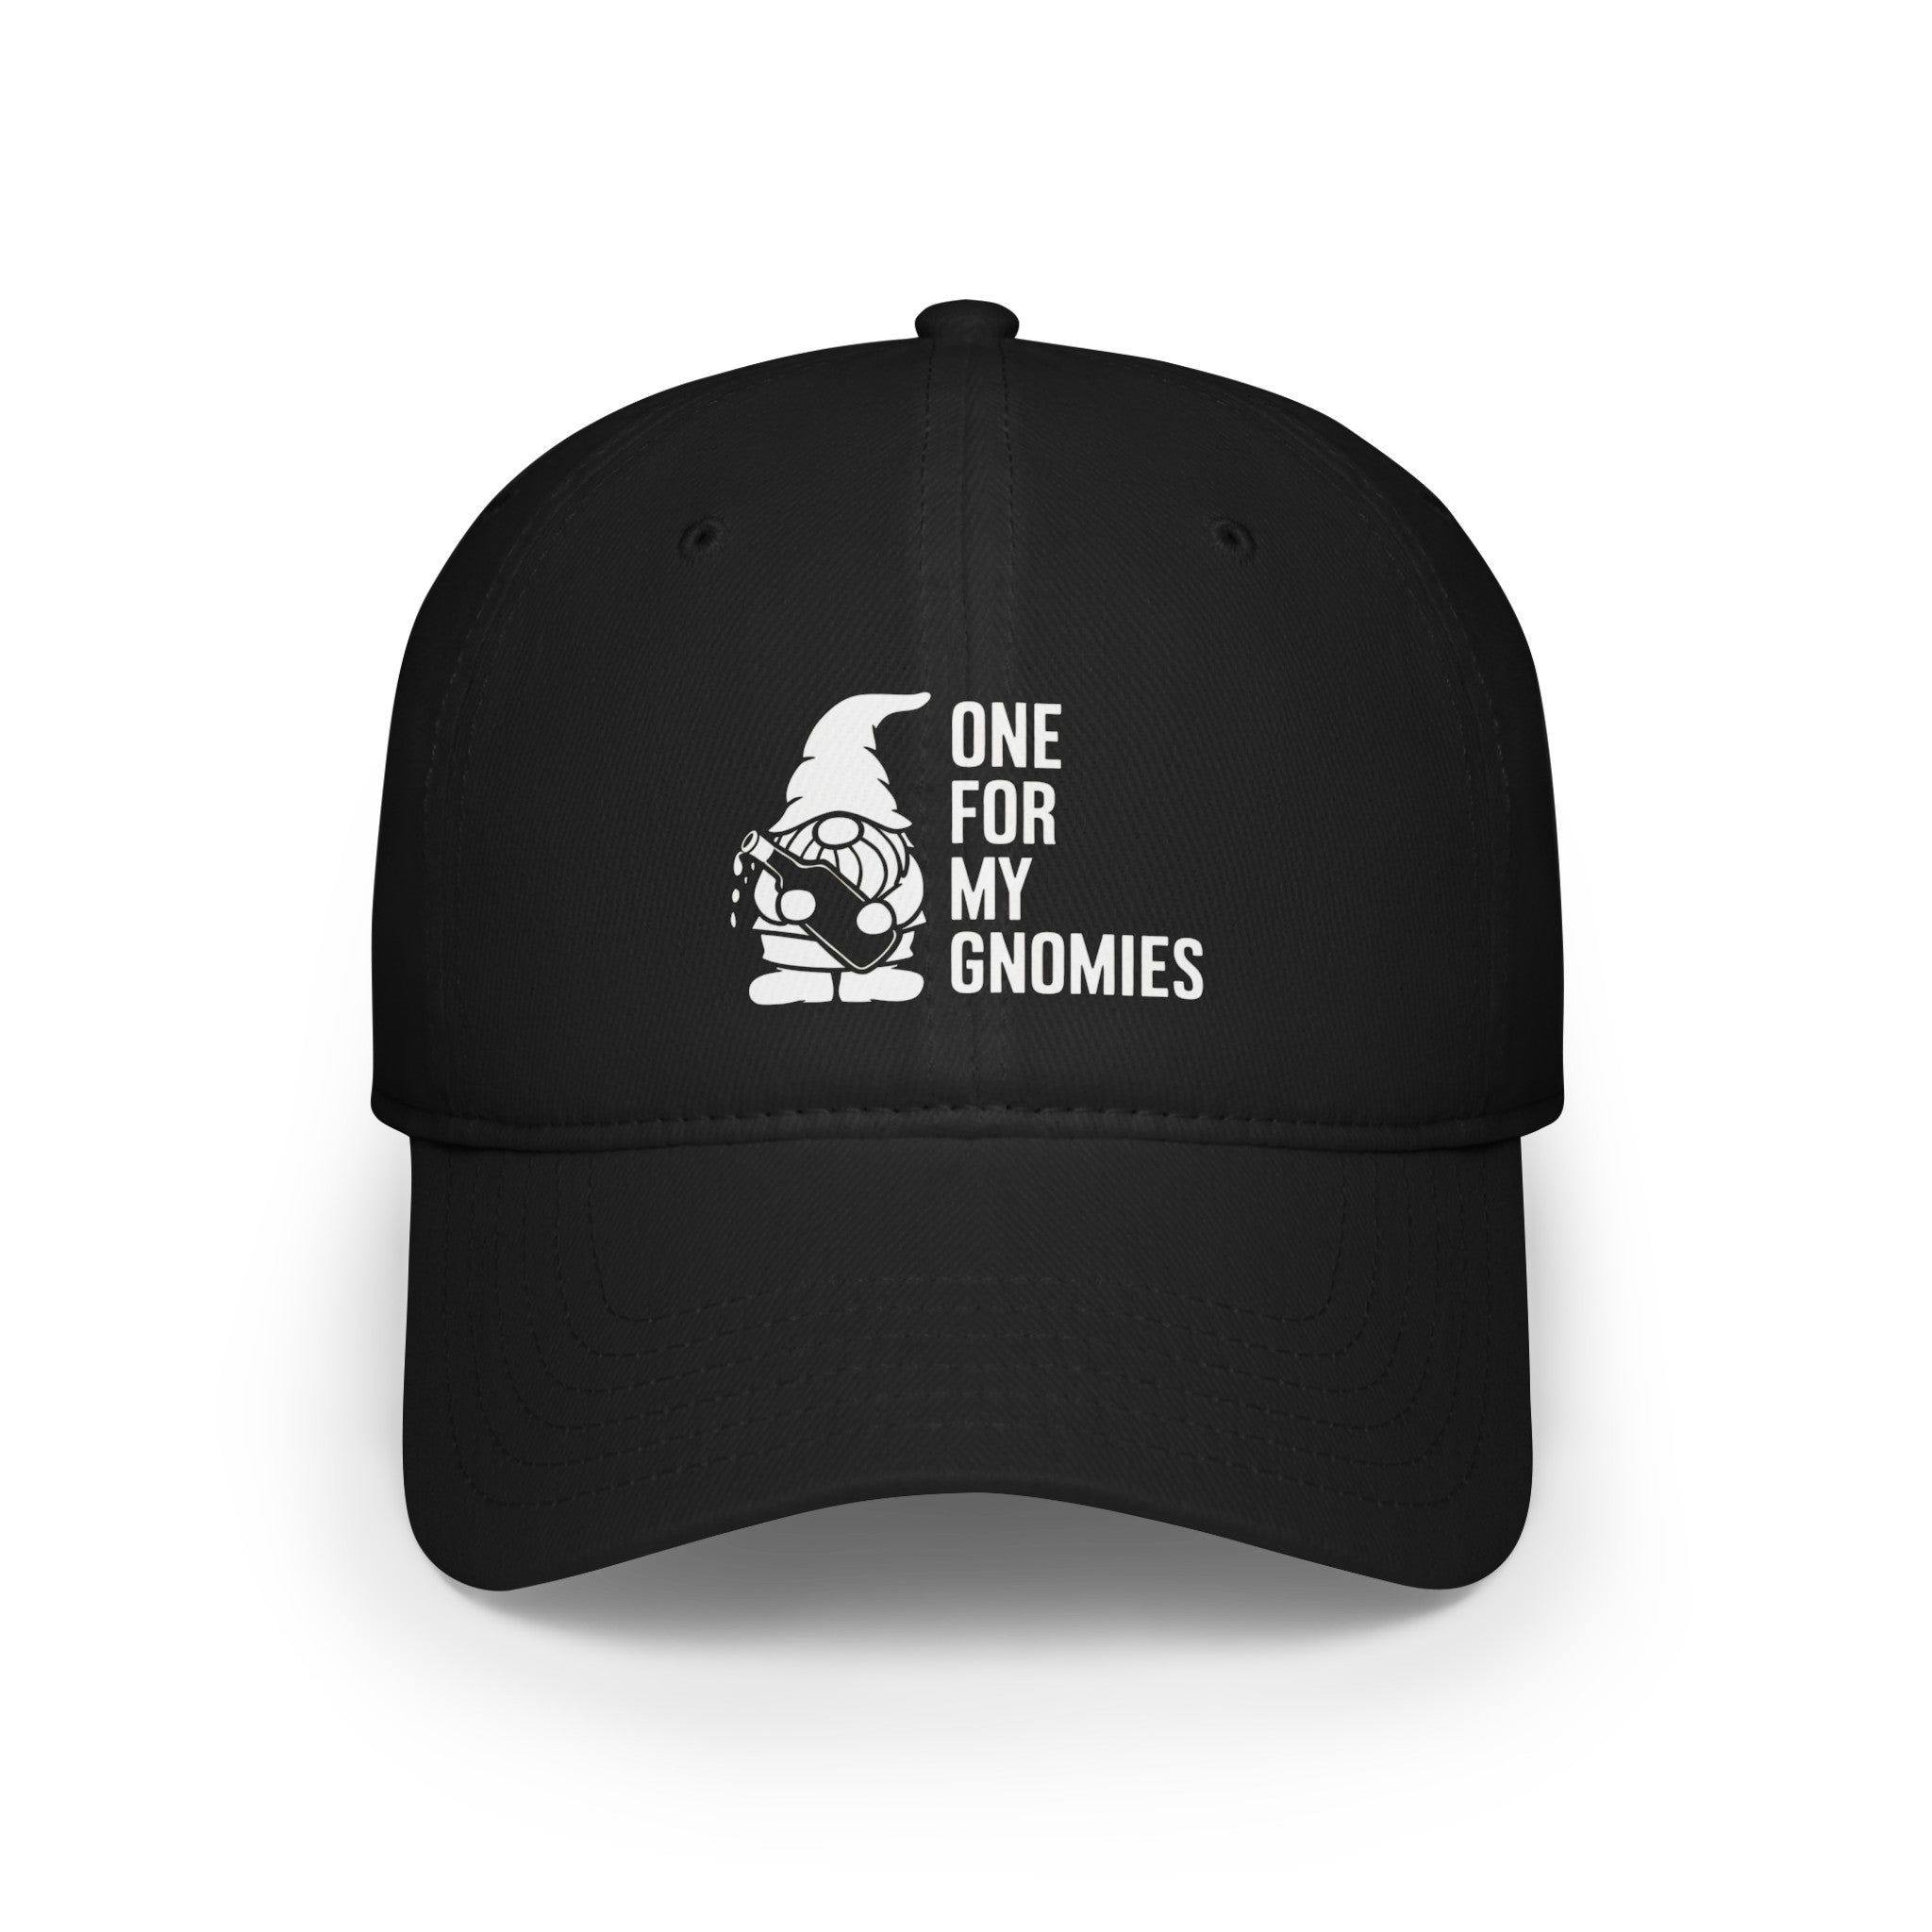 A One For My Gnomies - Hat featuring a graphic of a gnome holding a garden trowel with "One For My Gnomies" written in white, complete with reinforced stitching.